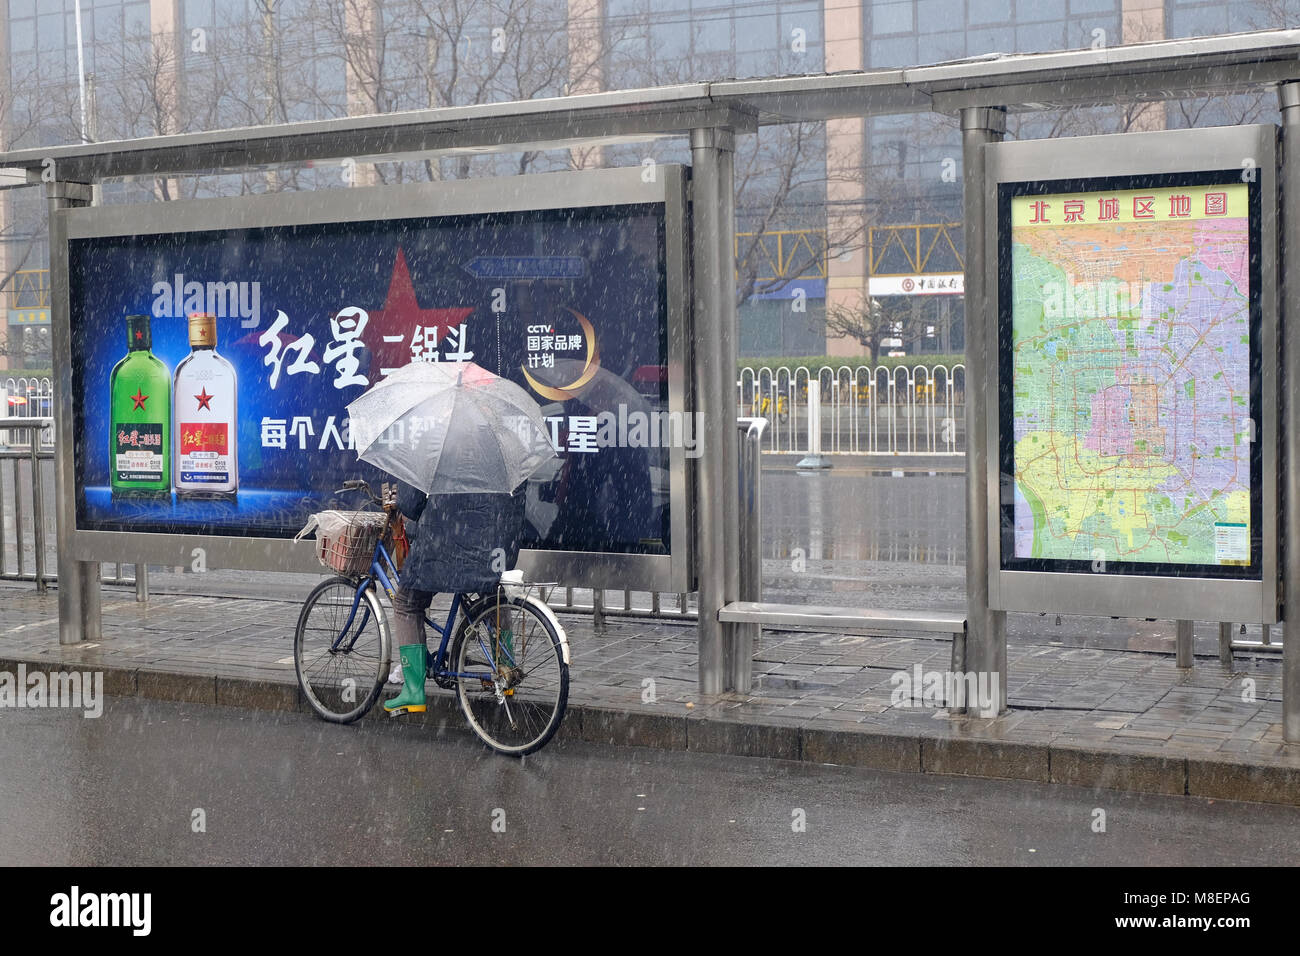 Beijing, China, March 17, 2018. Rare Snowy Day in Chaoyang District, Beijing, China. A person on a bicycle holding an umbrella beside an advertising board on a snowy day. Credit: Steven Liveoak/Alamy Live News Stock Photo